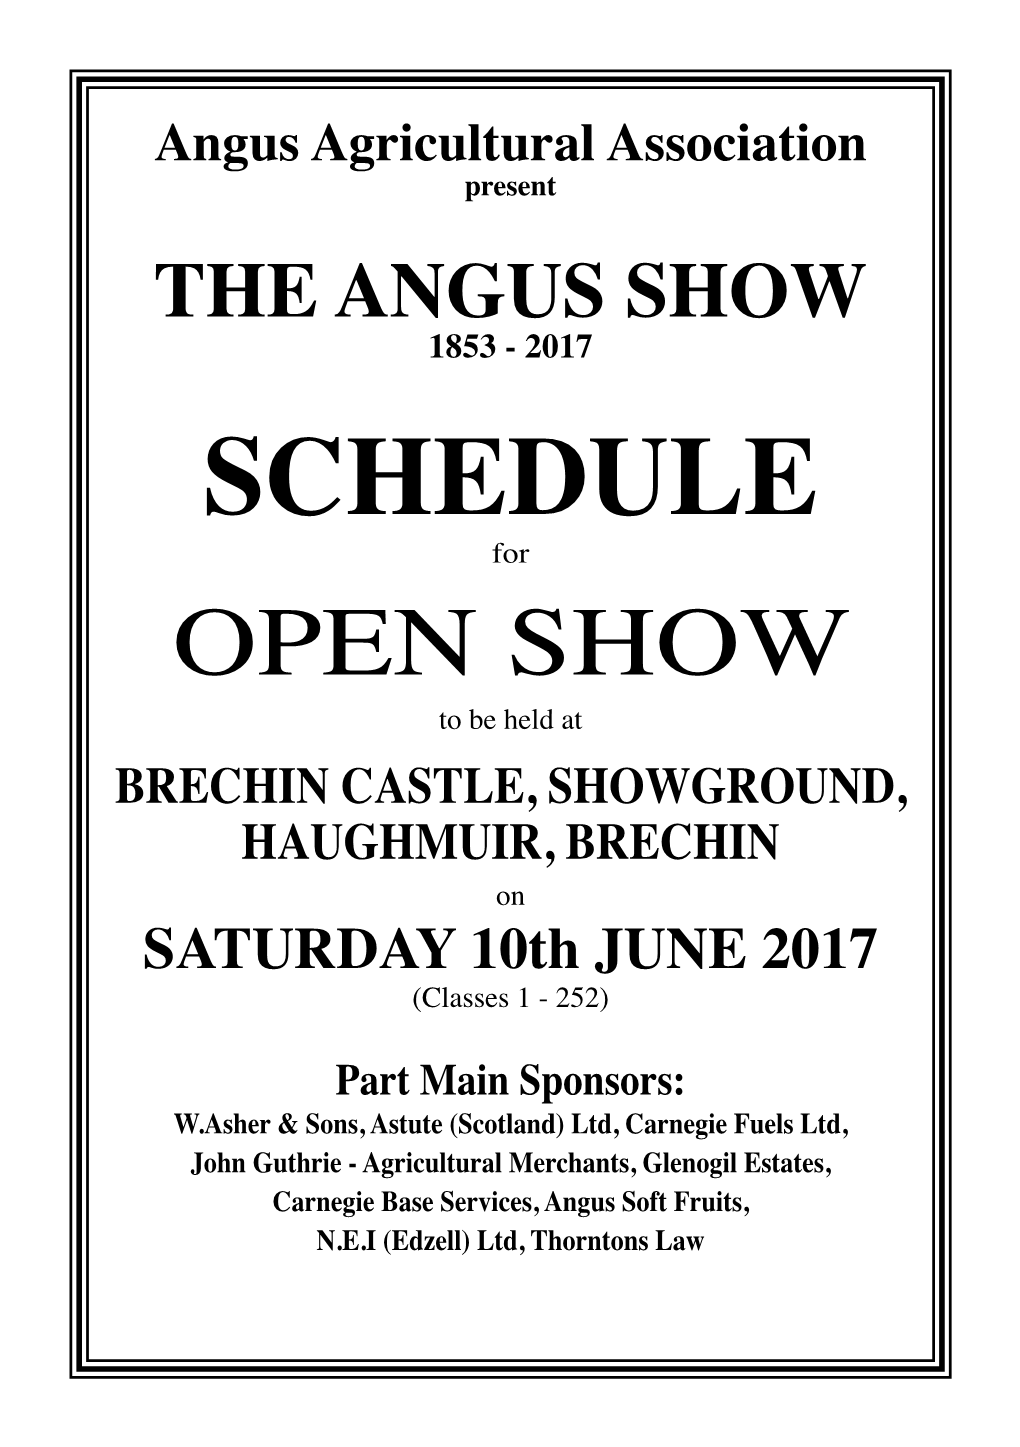 SCHEDULE for OPEN SHOW to Be Held at BRECHIN CASTLE, SHOWGROUND, HAUGHMUIR, BRECHIN on SATURDAY 10Th JUNE 2017 (Classes 1 - 252)